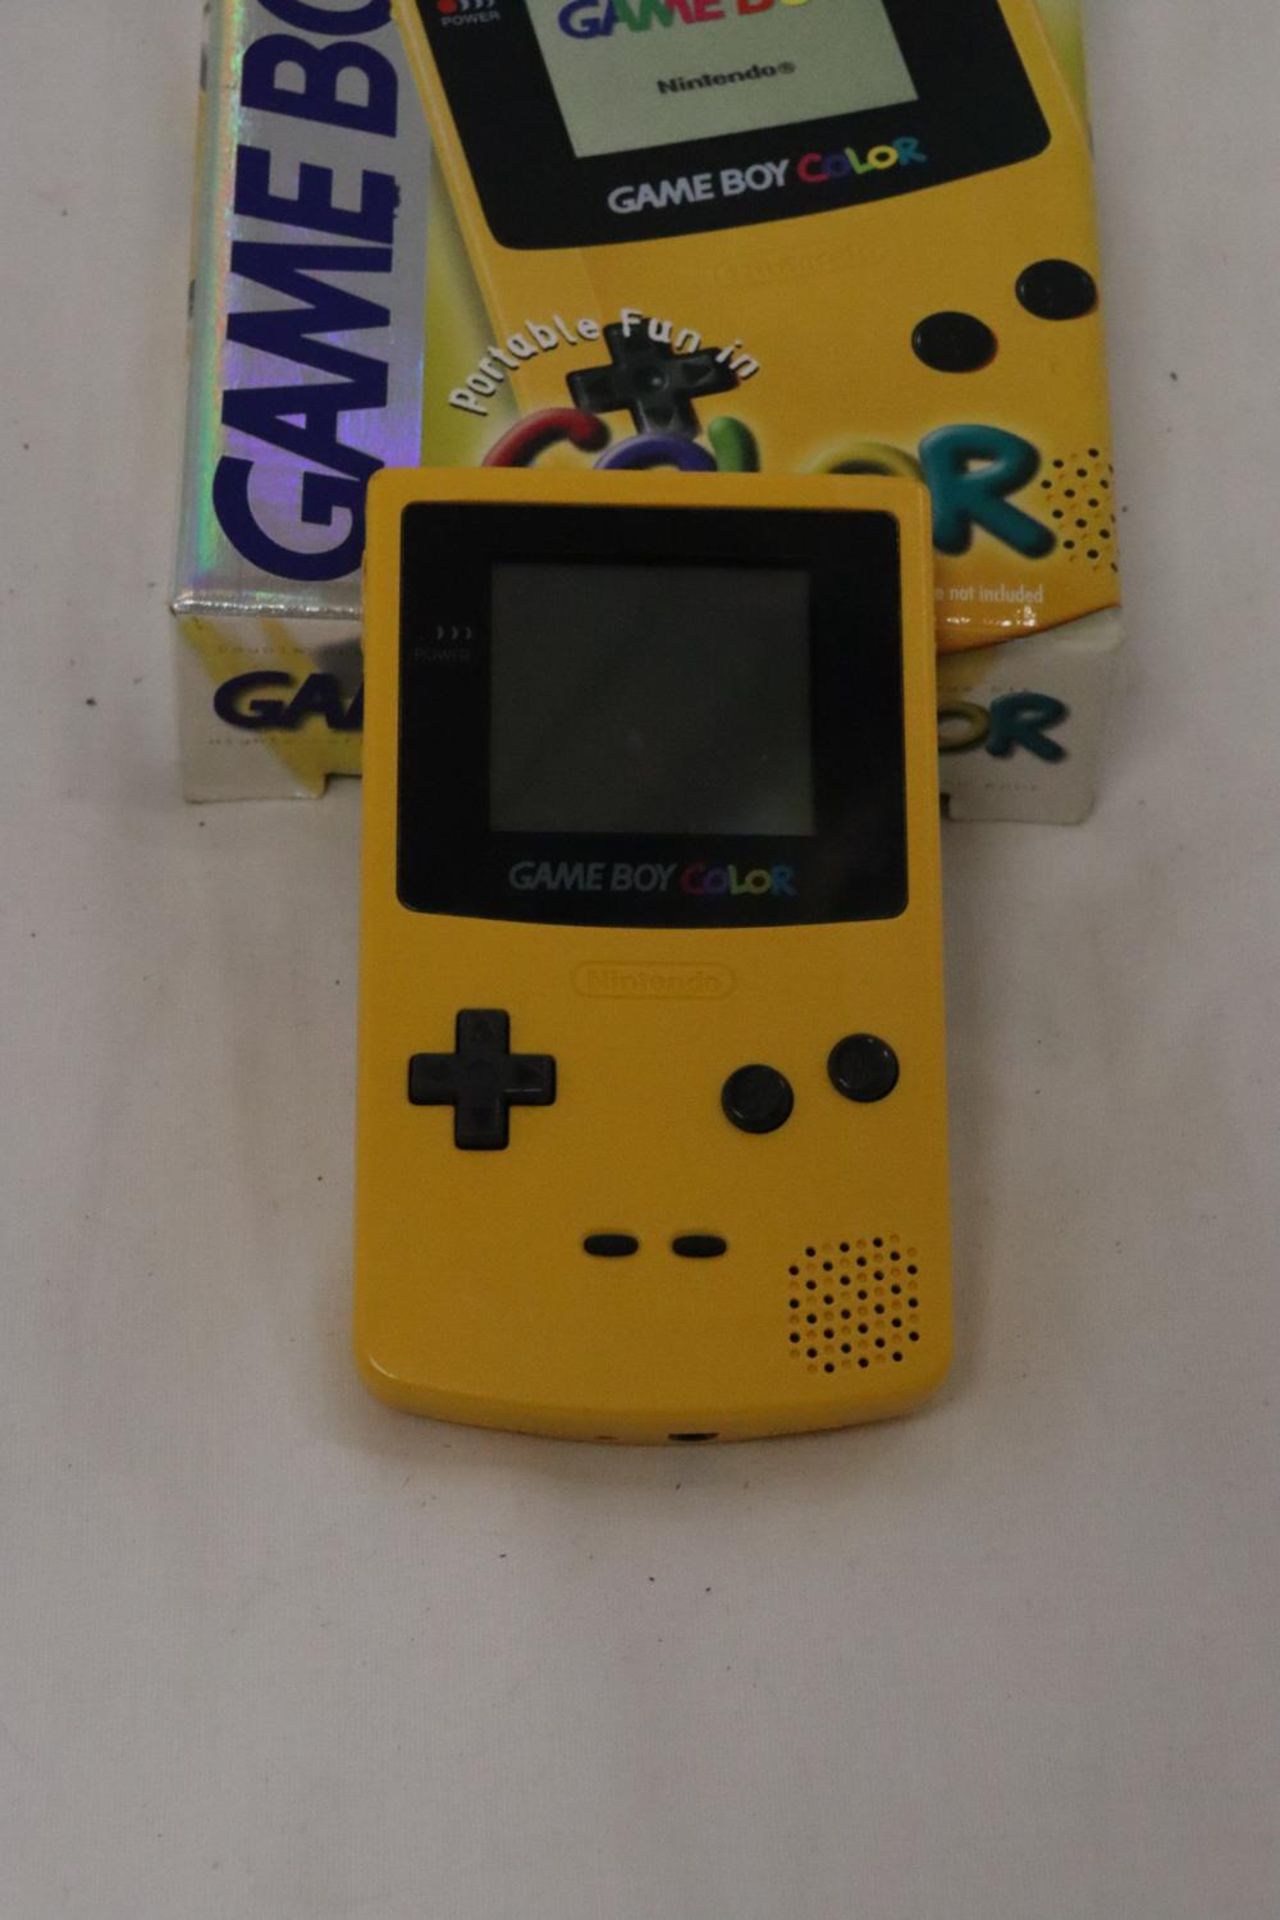 A BOXED GAMEBOY COLOUR, PORTABLE HANDHELD GAMES CONSOLE - Image 4 of 4